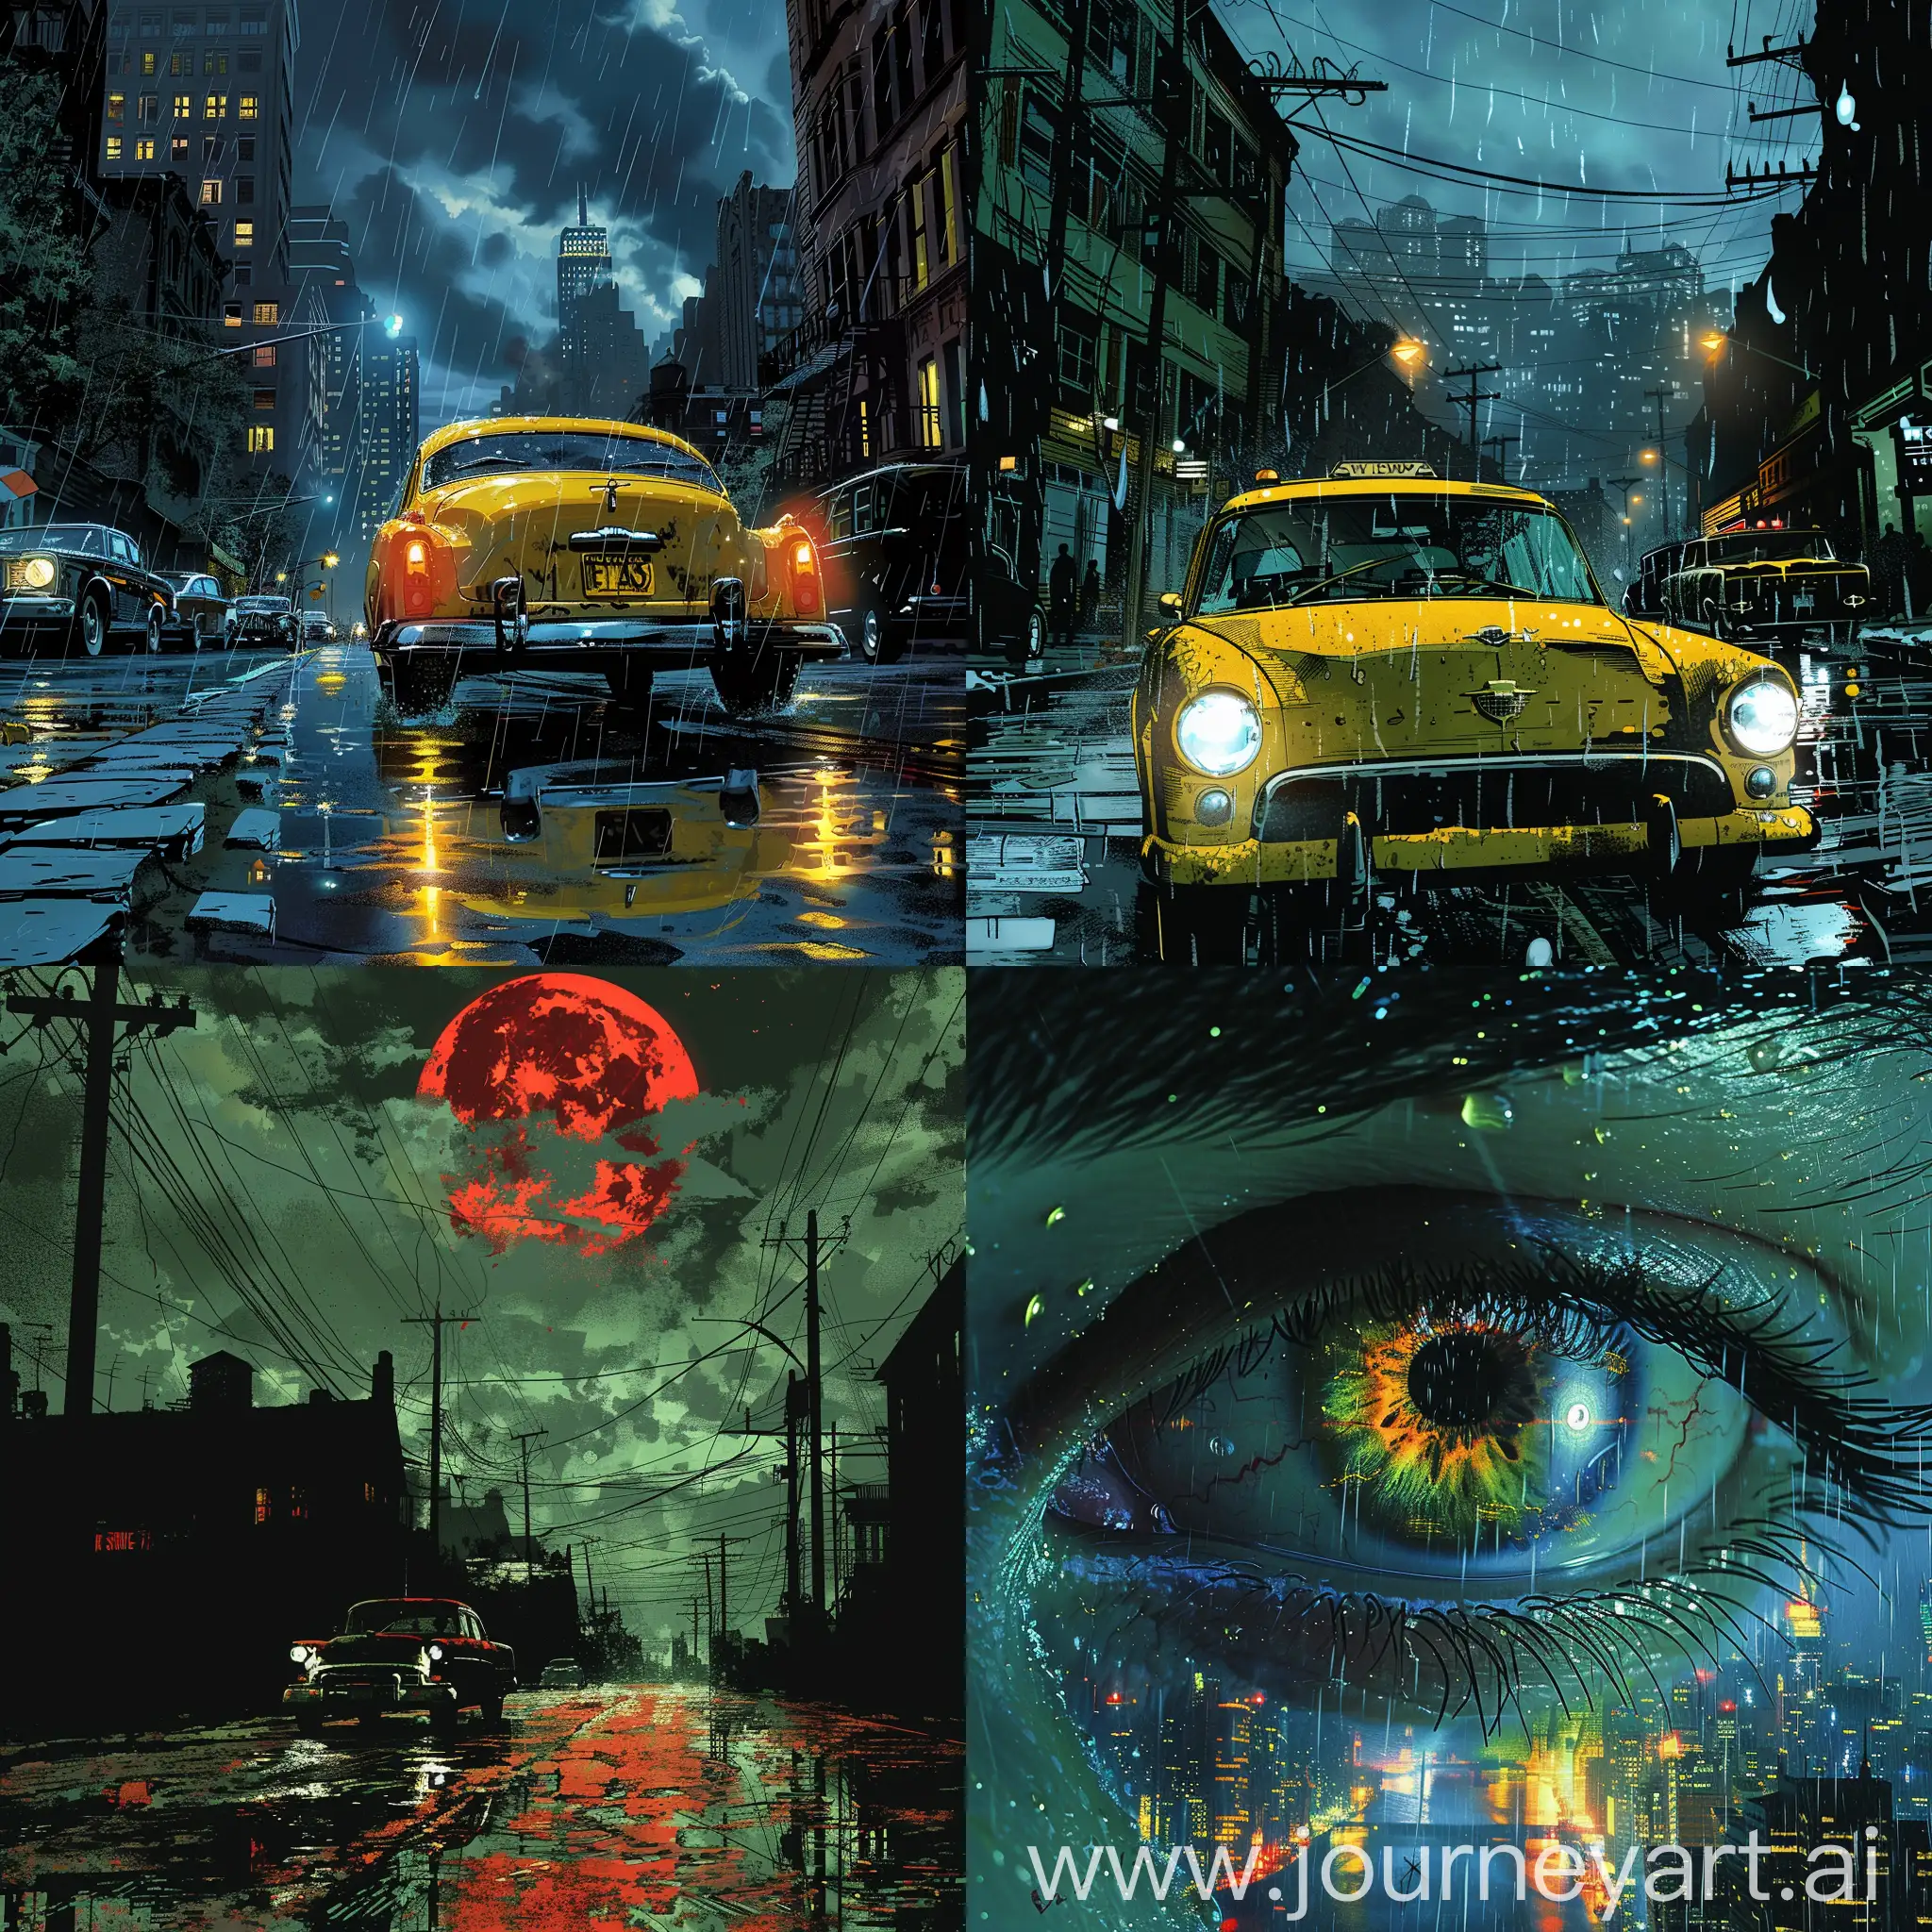 Nocturnal-Noir-Mysterious-Taxi-Ride-in-the-Rainy-Night